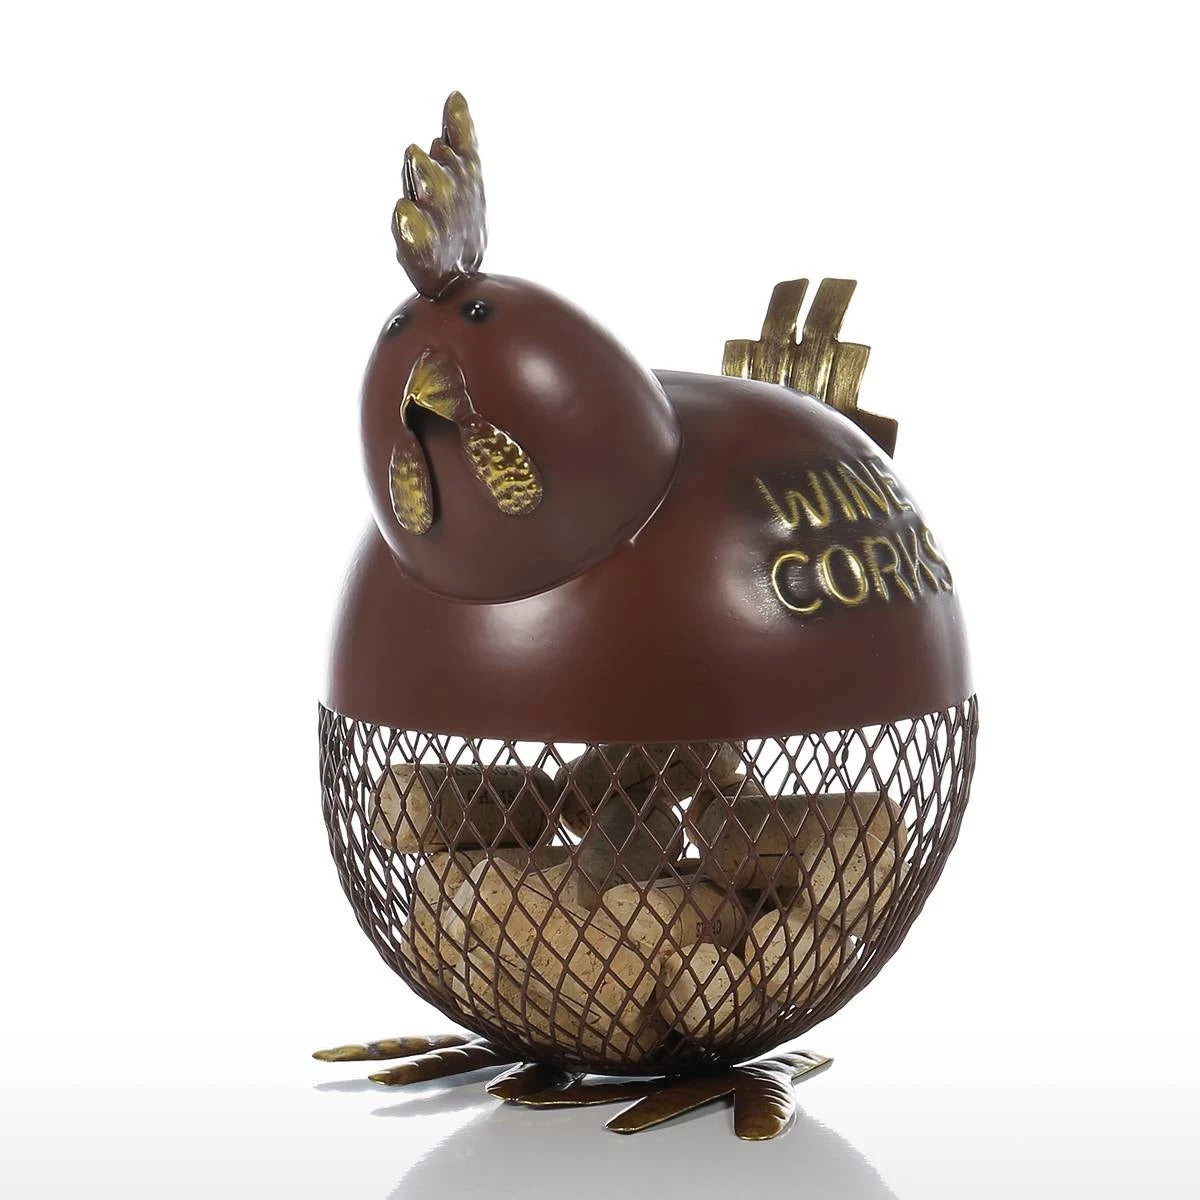 Decorative Jar with Metal Chicken for Kitchen Countertop Decor